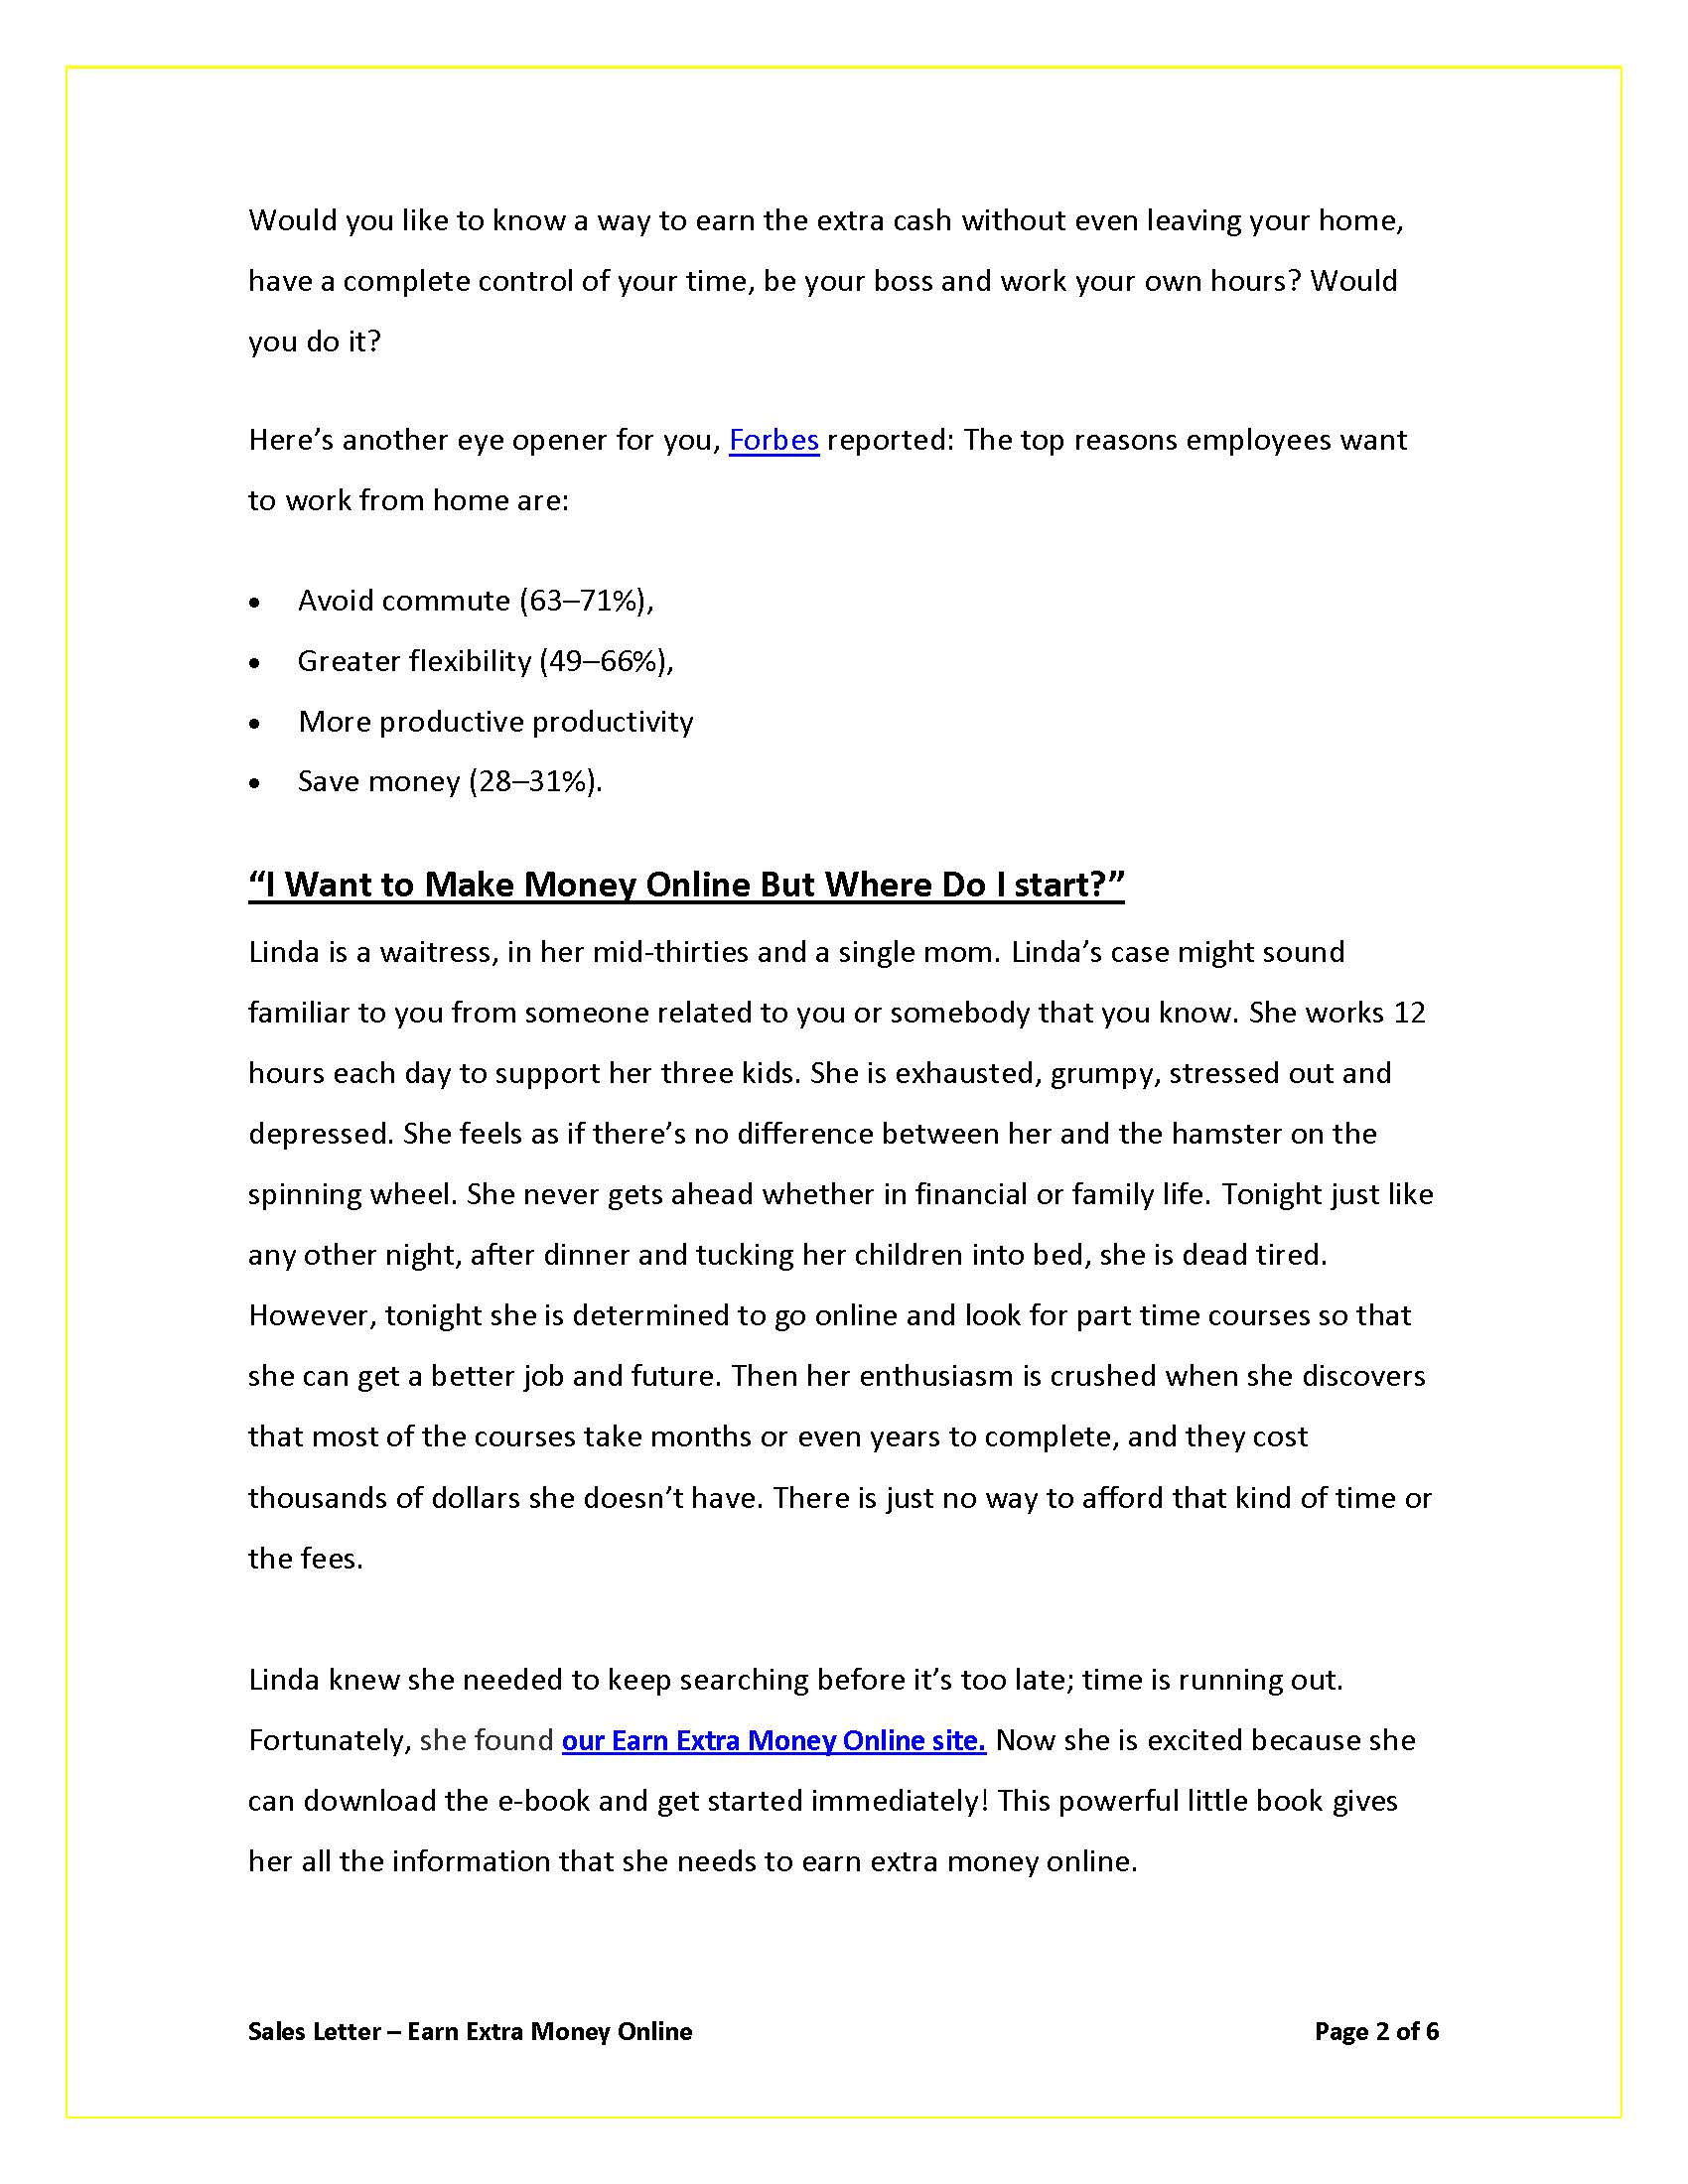 Sales Letter - How To Earn Money Online_Page_2